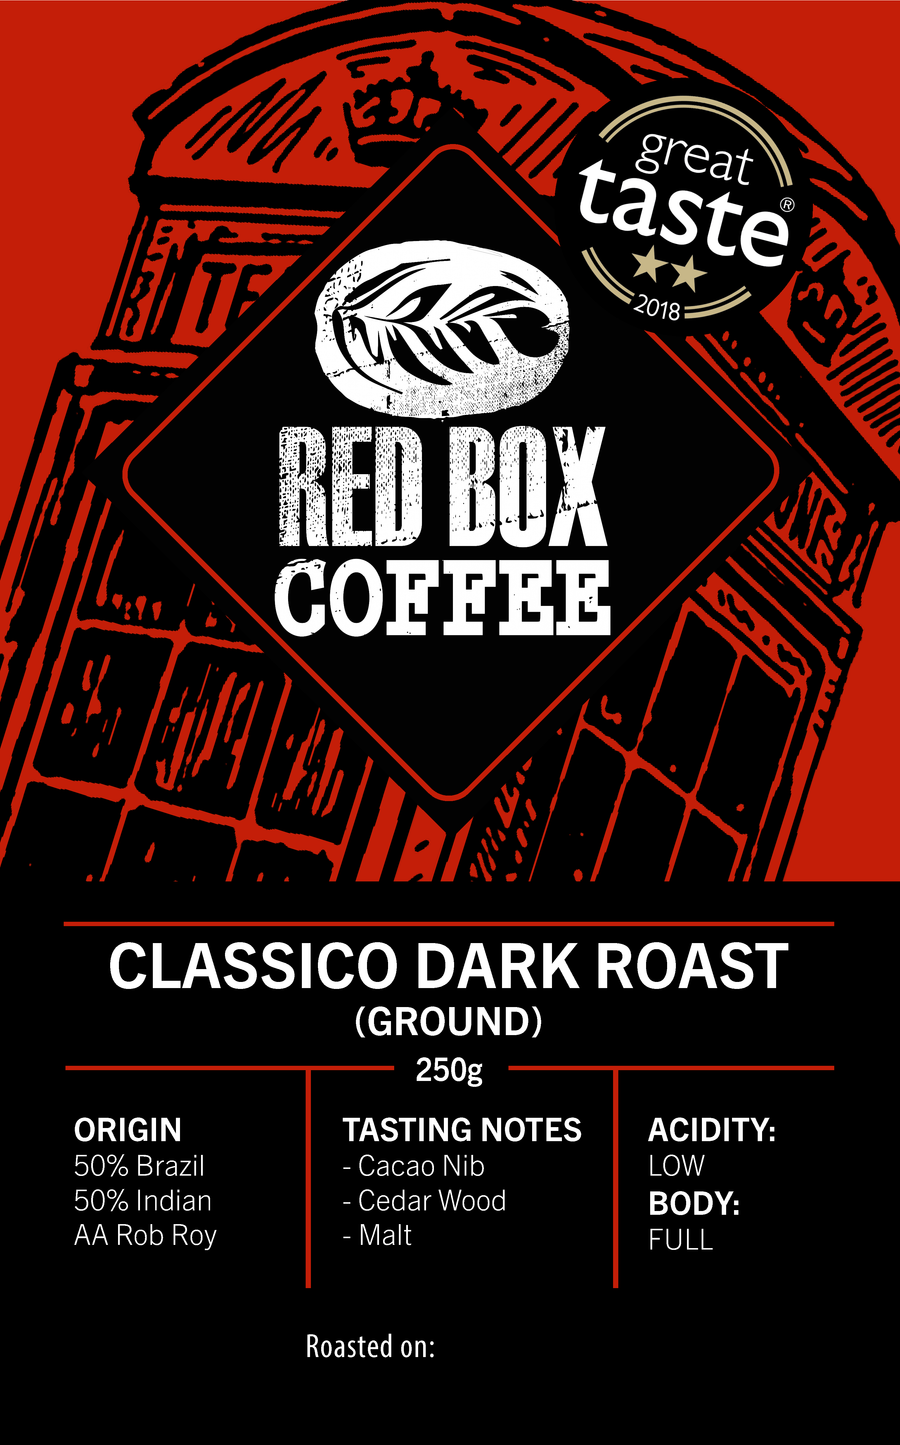 Red Box Classico Roast Coffee, Great Taste 2-Star 2018 - GROUND FOR FRENCH PRESS